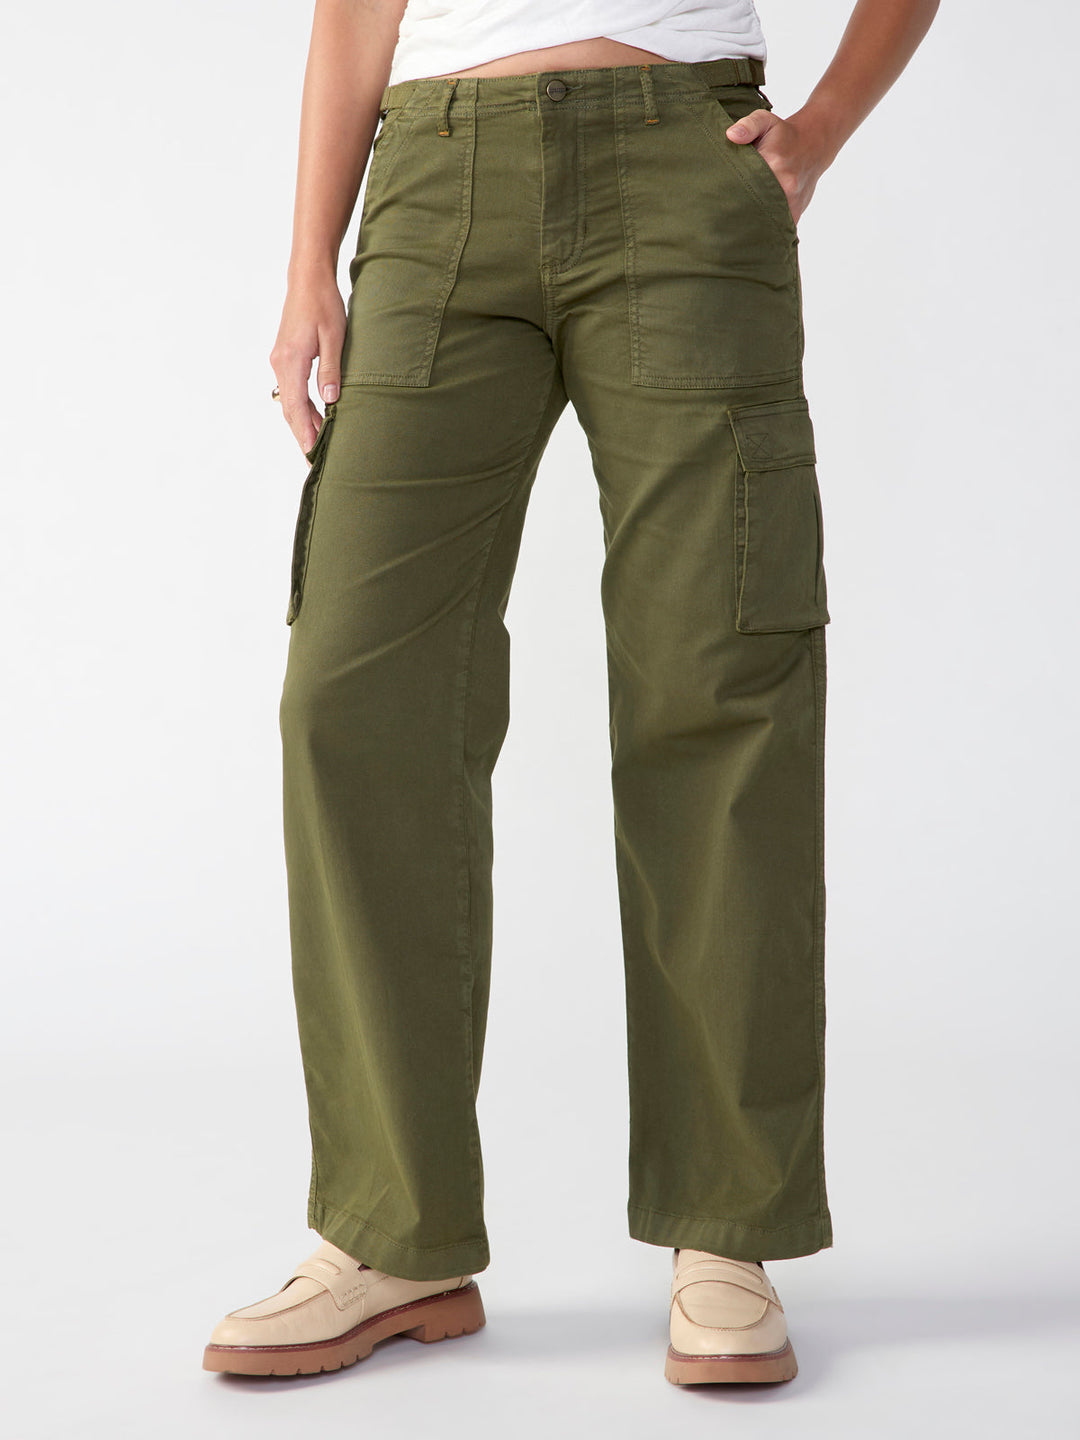 REISSUE CARGO - MOSSY GREEN - Kingfisher Road - Online Boutique